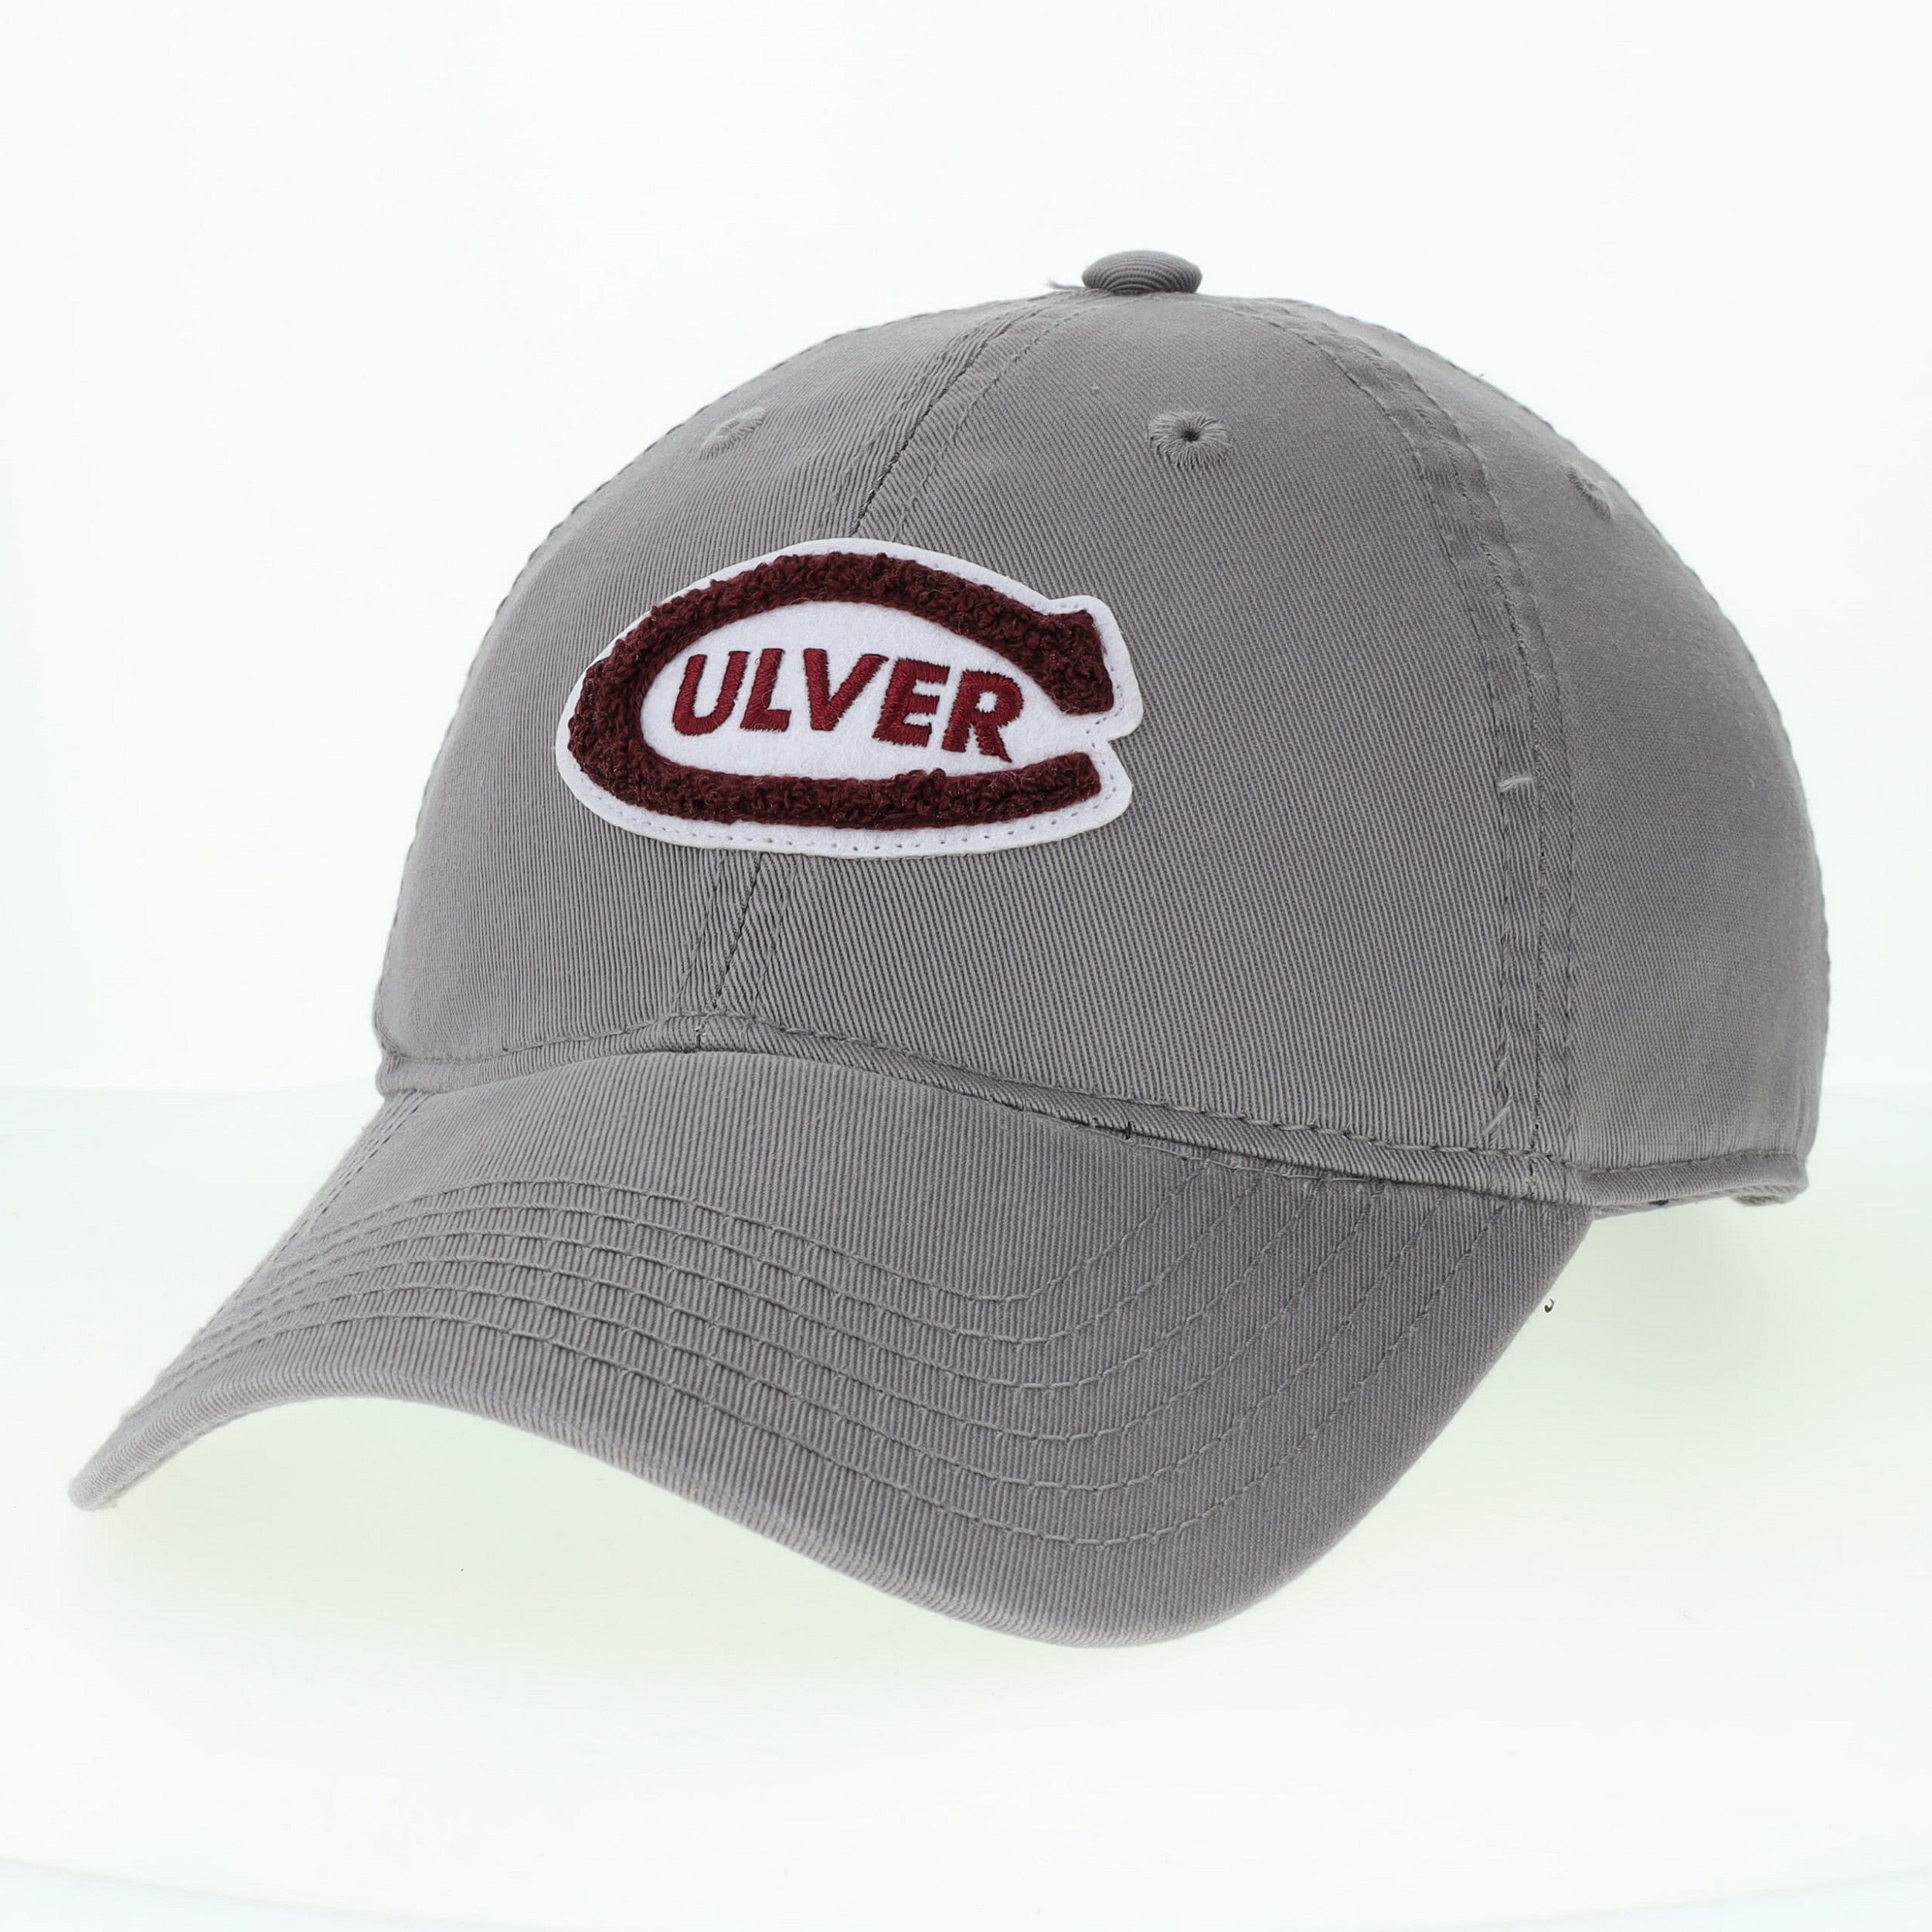 Chenille Varsity Culver Relaxed Twill Hat - Grey